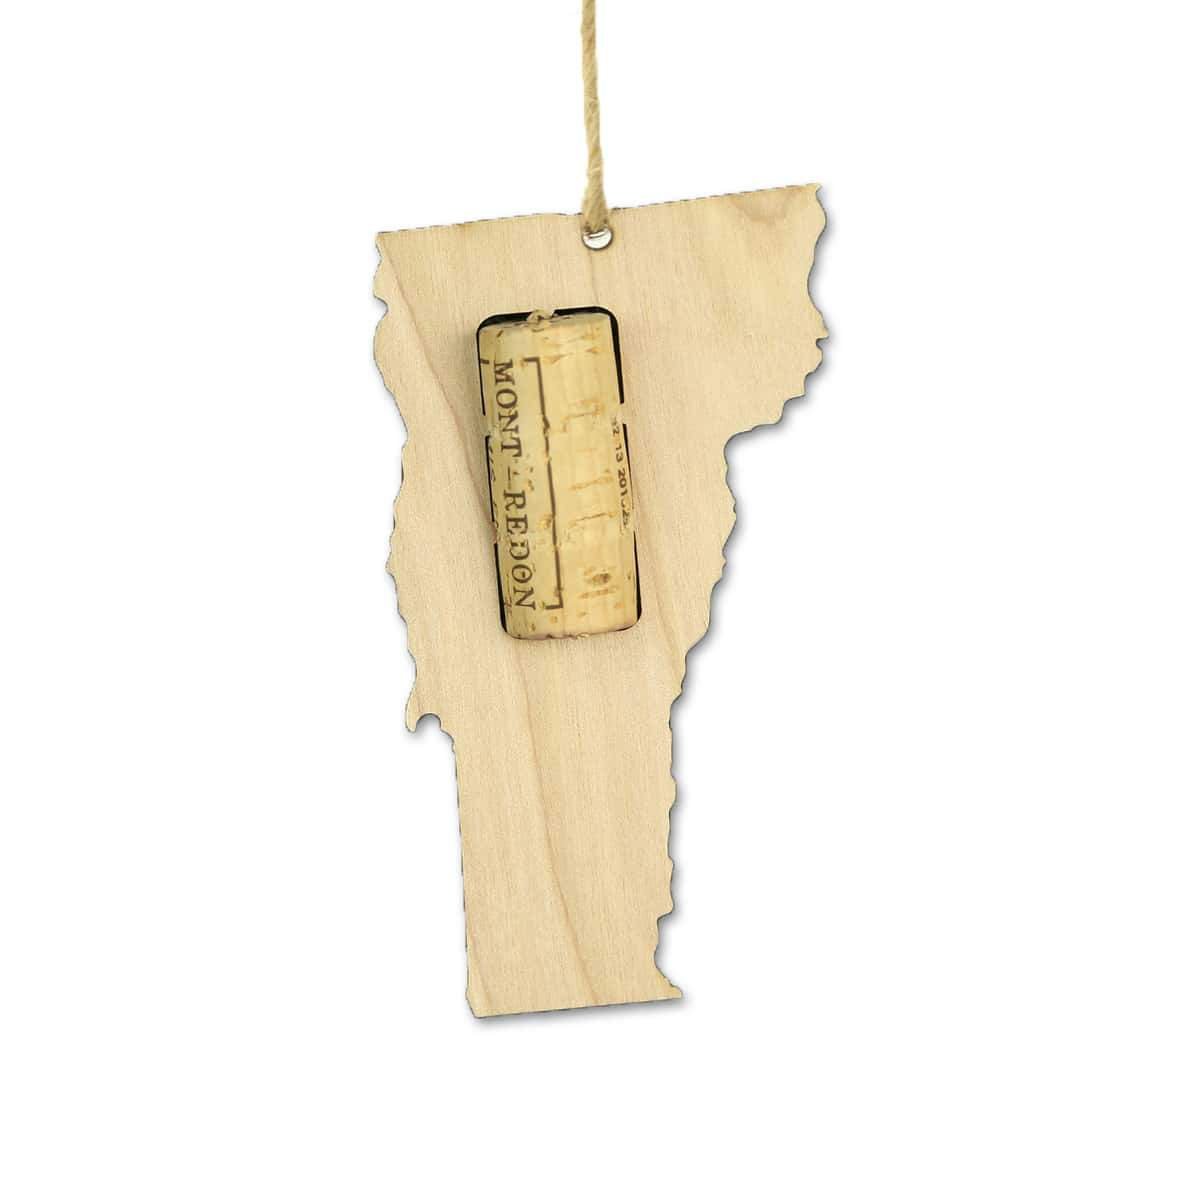 Torched Products Wine Cork Holder Vermont Wine Cork Holder Ornaments (781206487157)